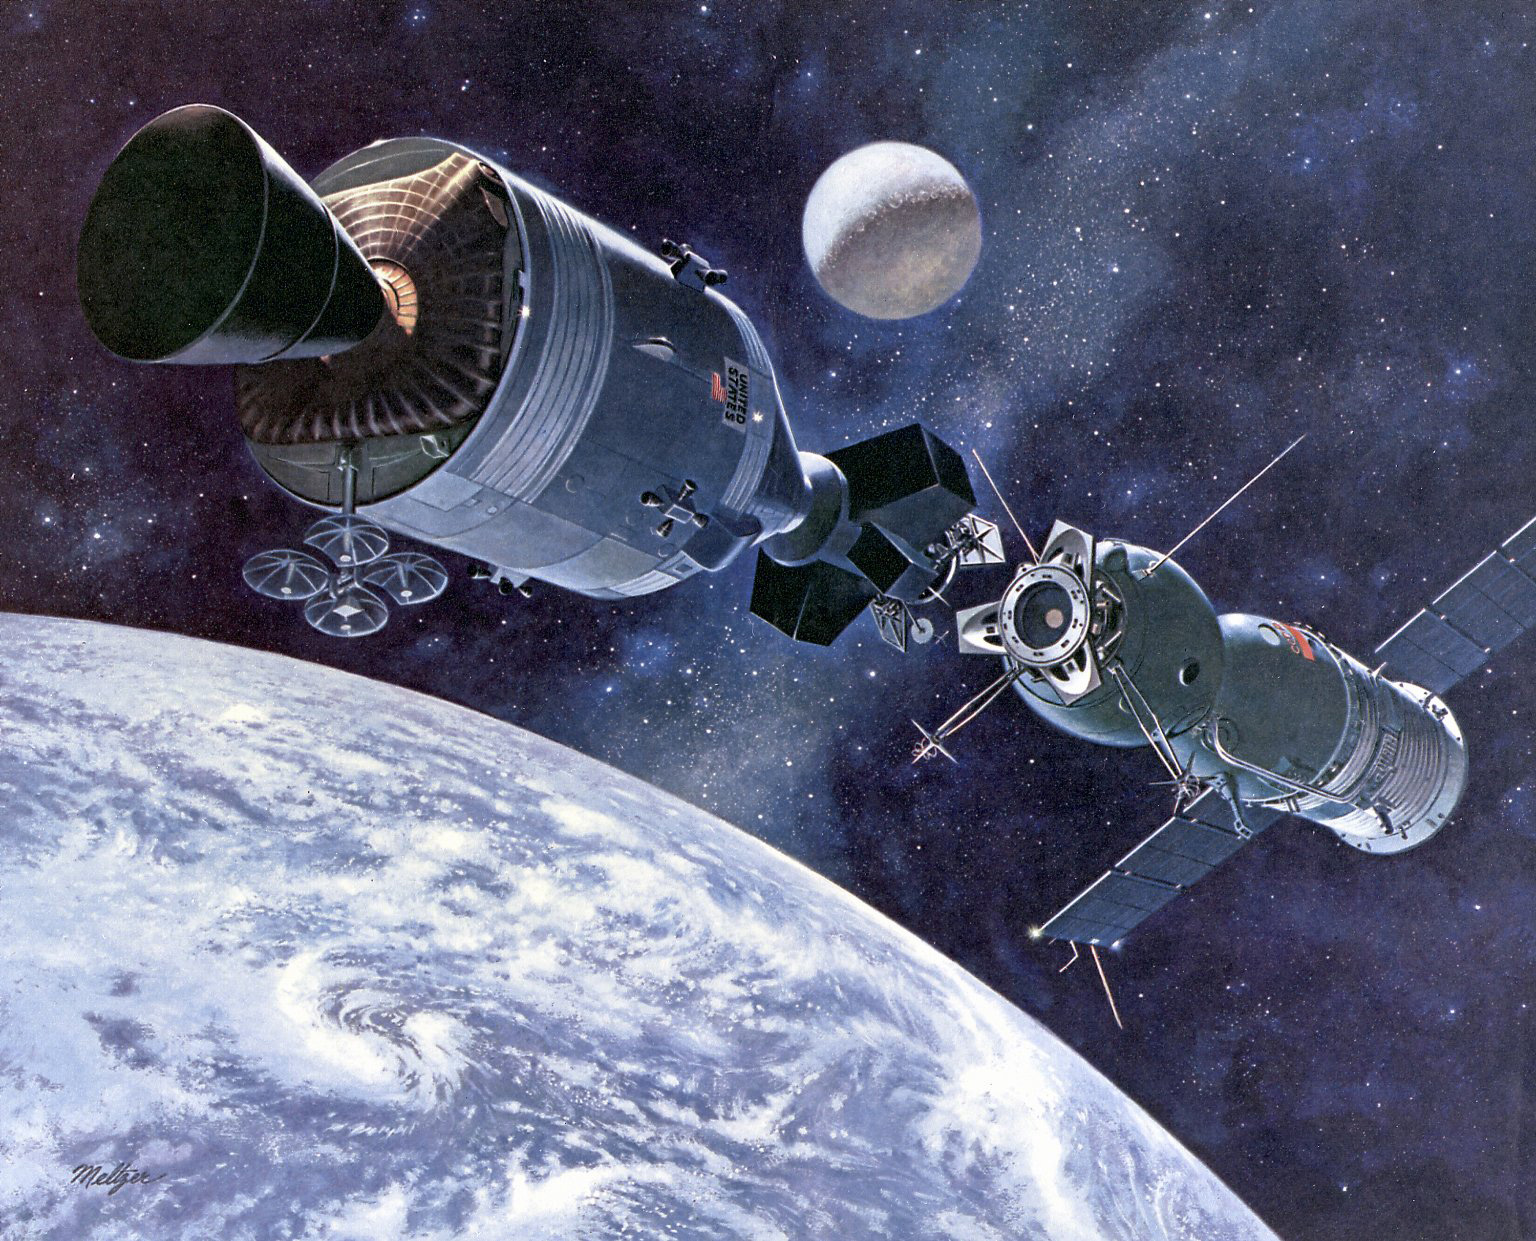 Apollo-Soyuz Test Project: An American Apollo and a Soviet Soyuz spacecraft dock with each other in orbit marking the first such link-up between spacecraft from the two nations